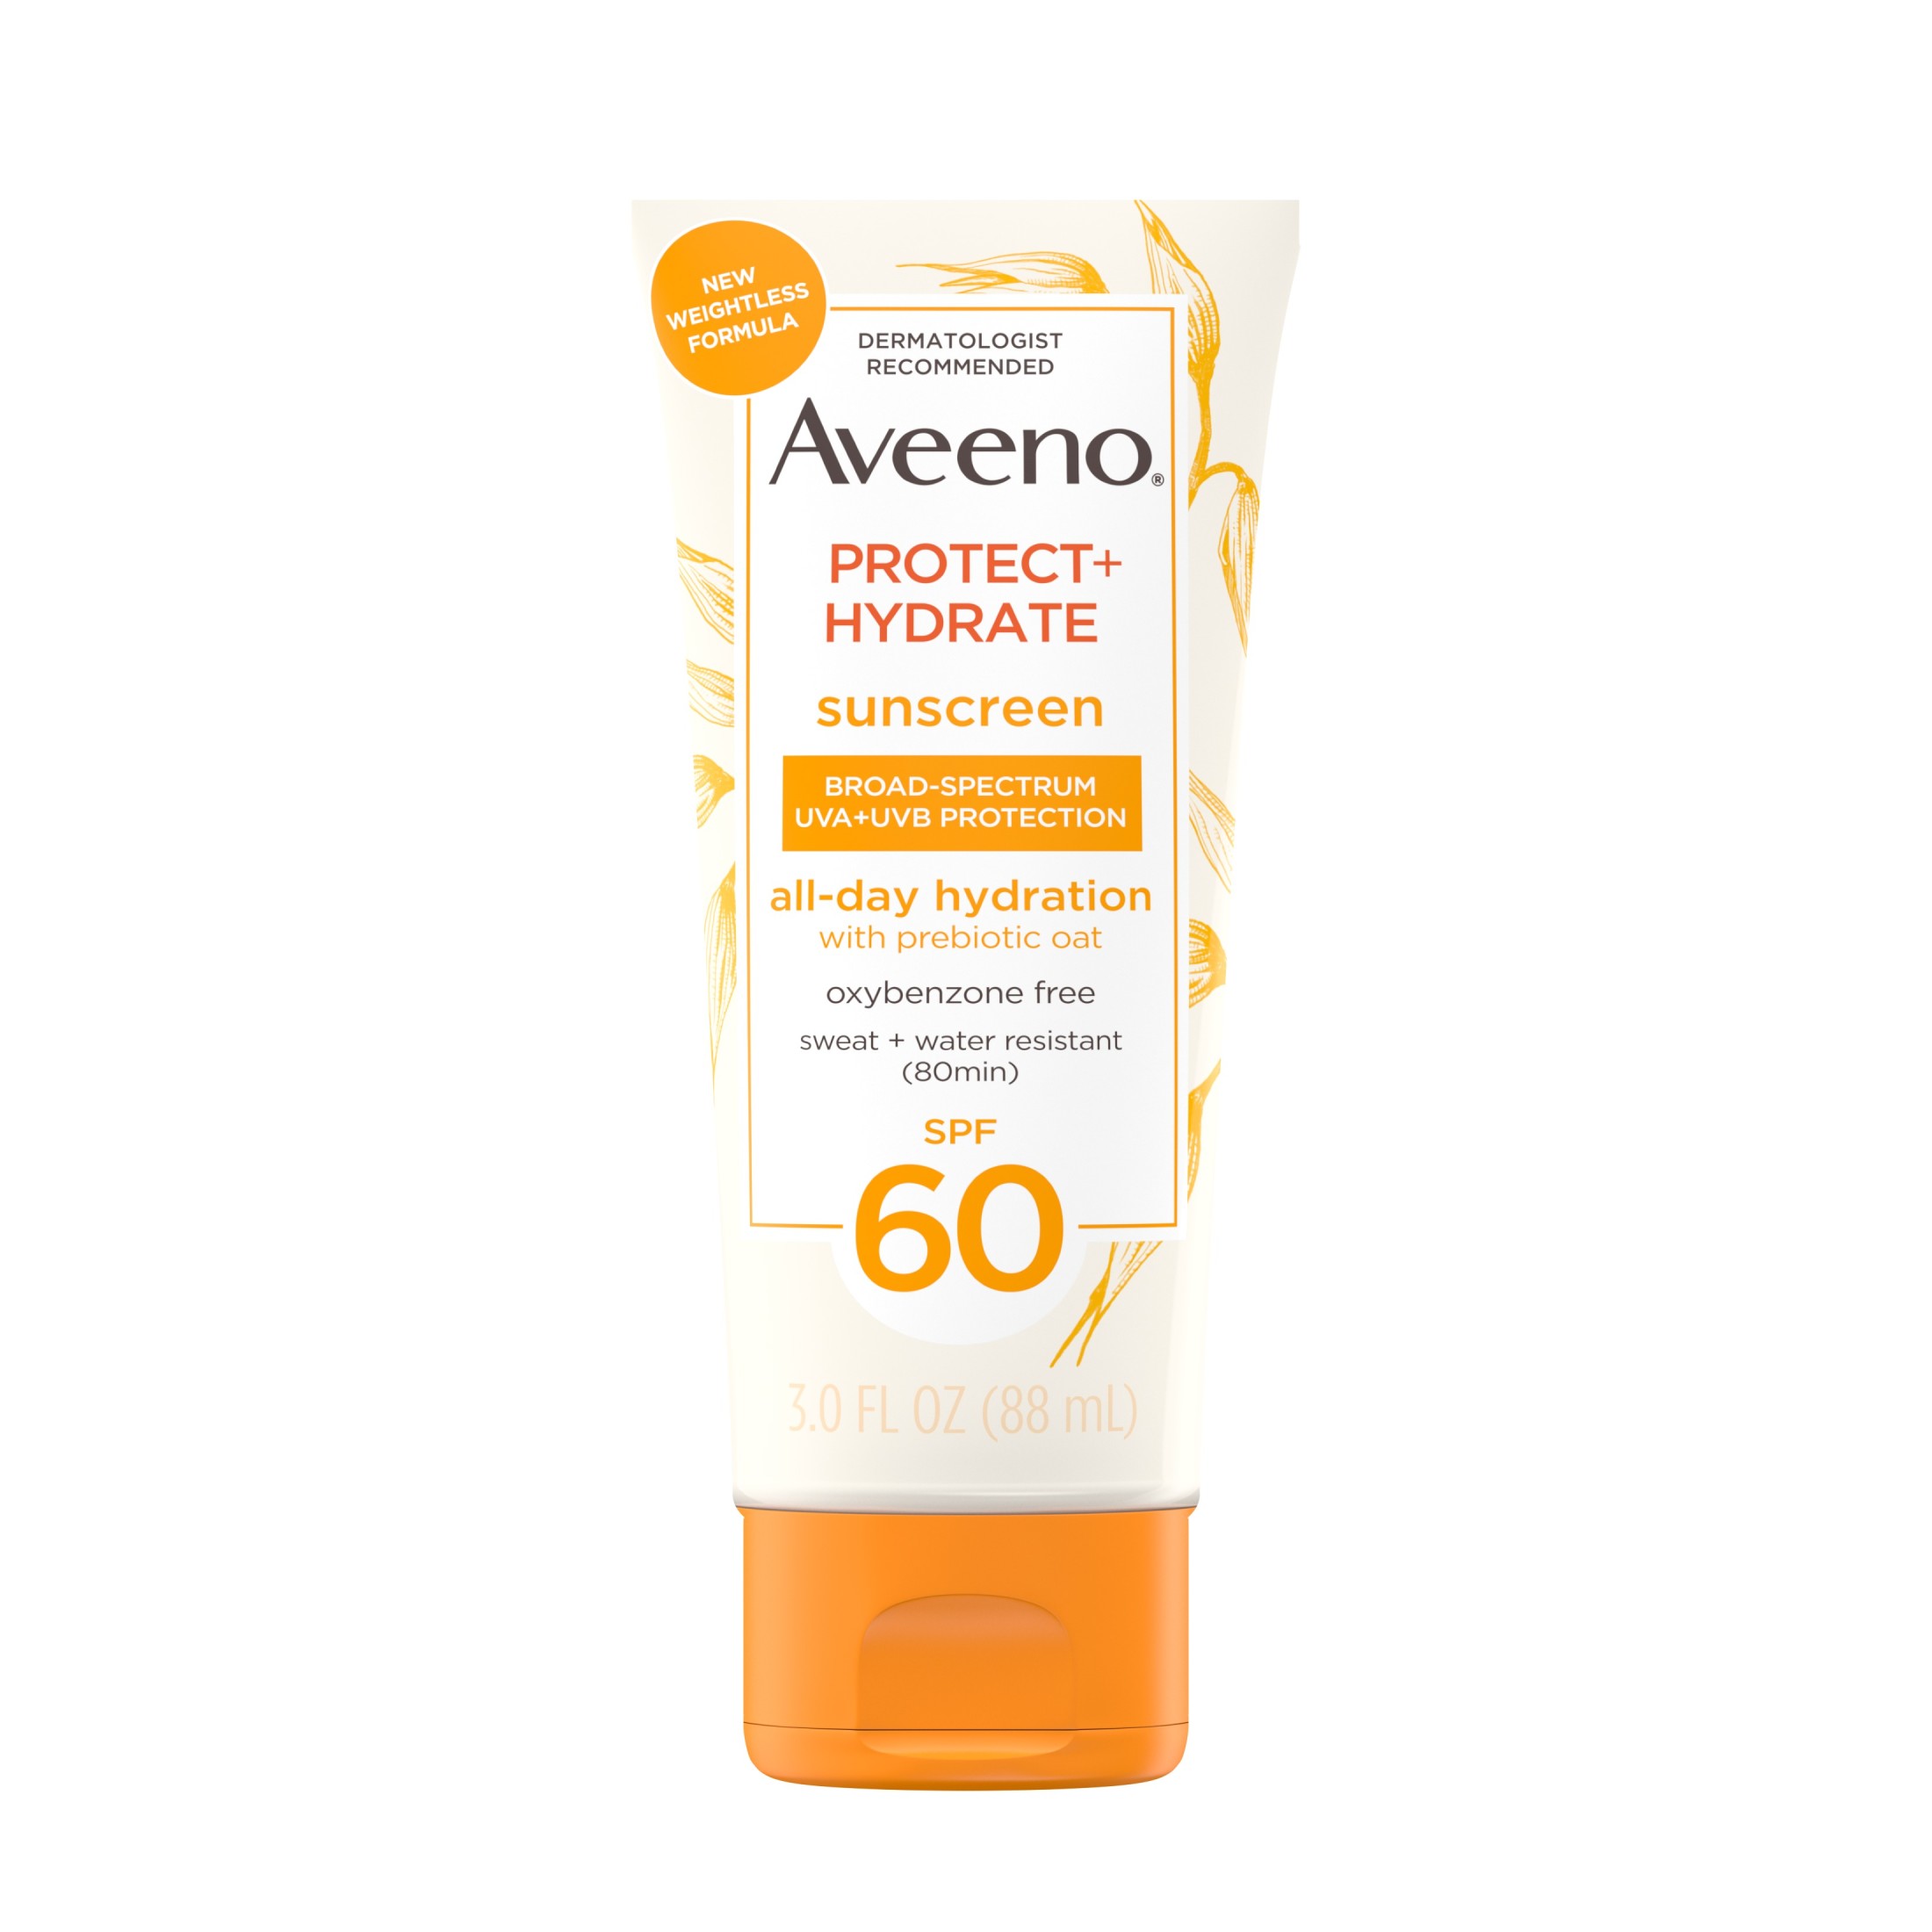 Aveeno Protect + Hydrate Body Sunscreen Lotion with SPF 60, 3.0 fl. oz - image 1 of 17